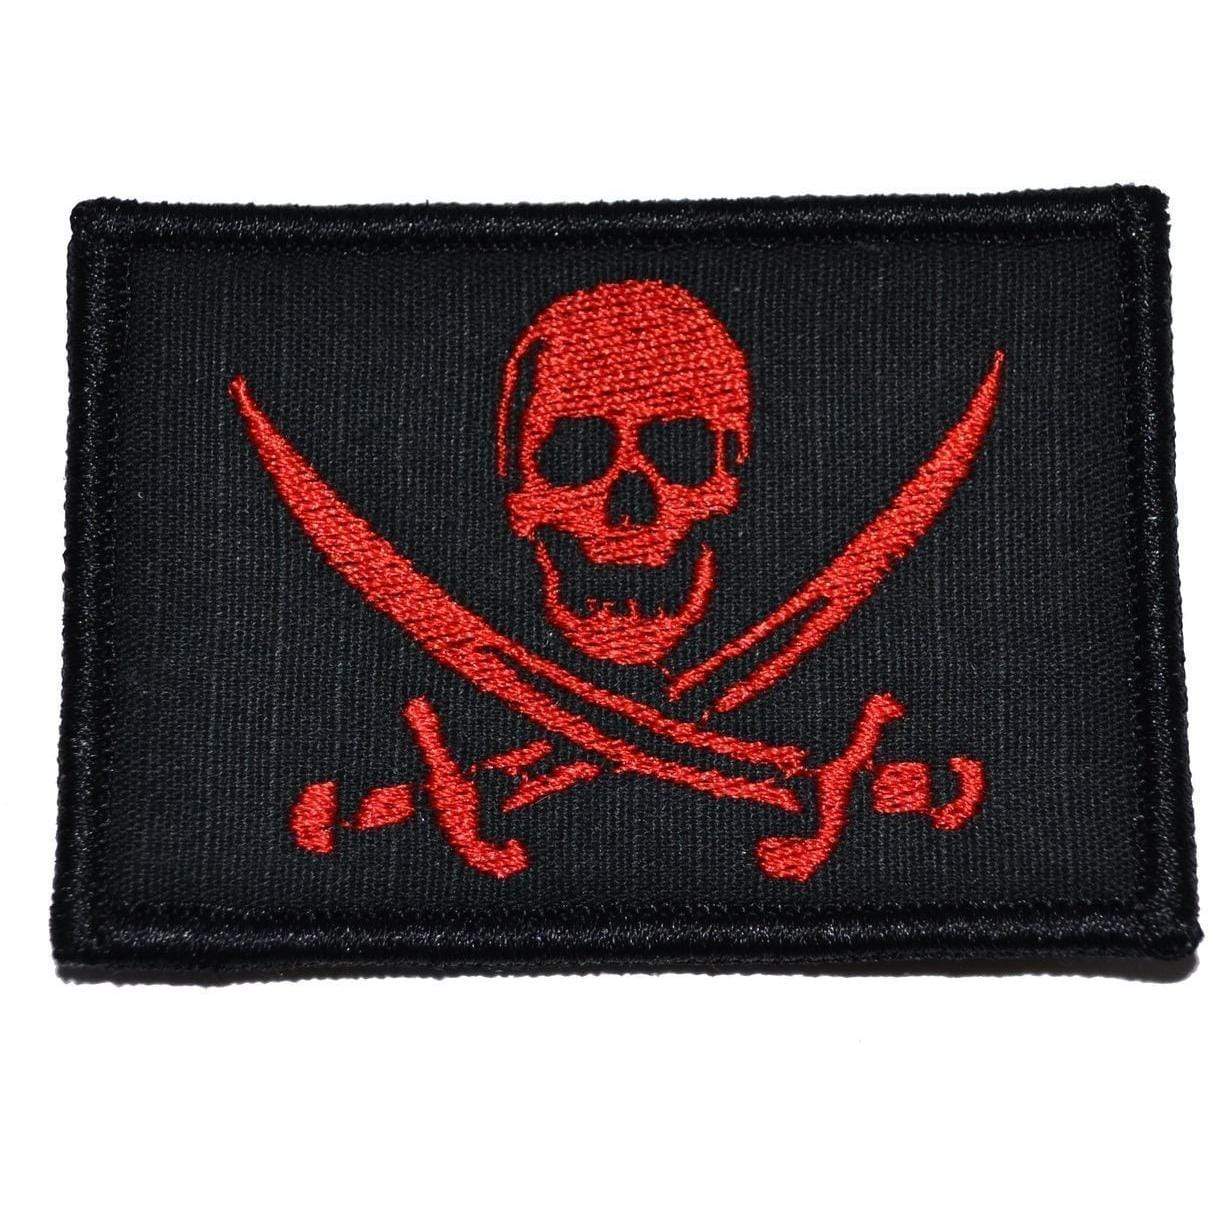 Tactical Gear Junkie Patches Black w/ Red Pirate Jolly Roger - 2x3 Patch